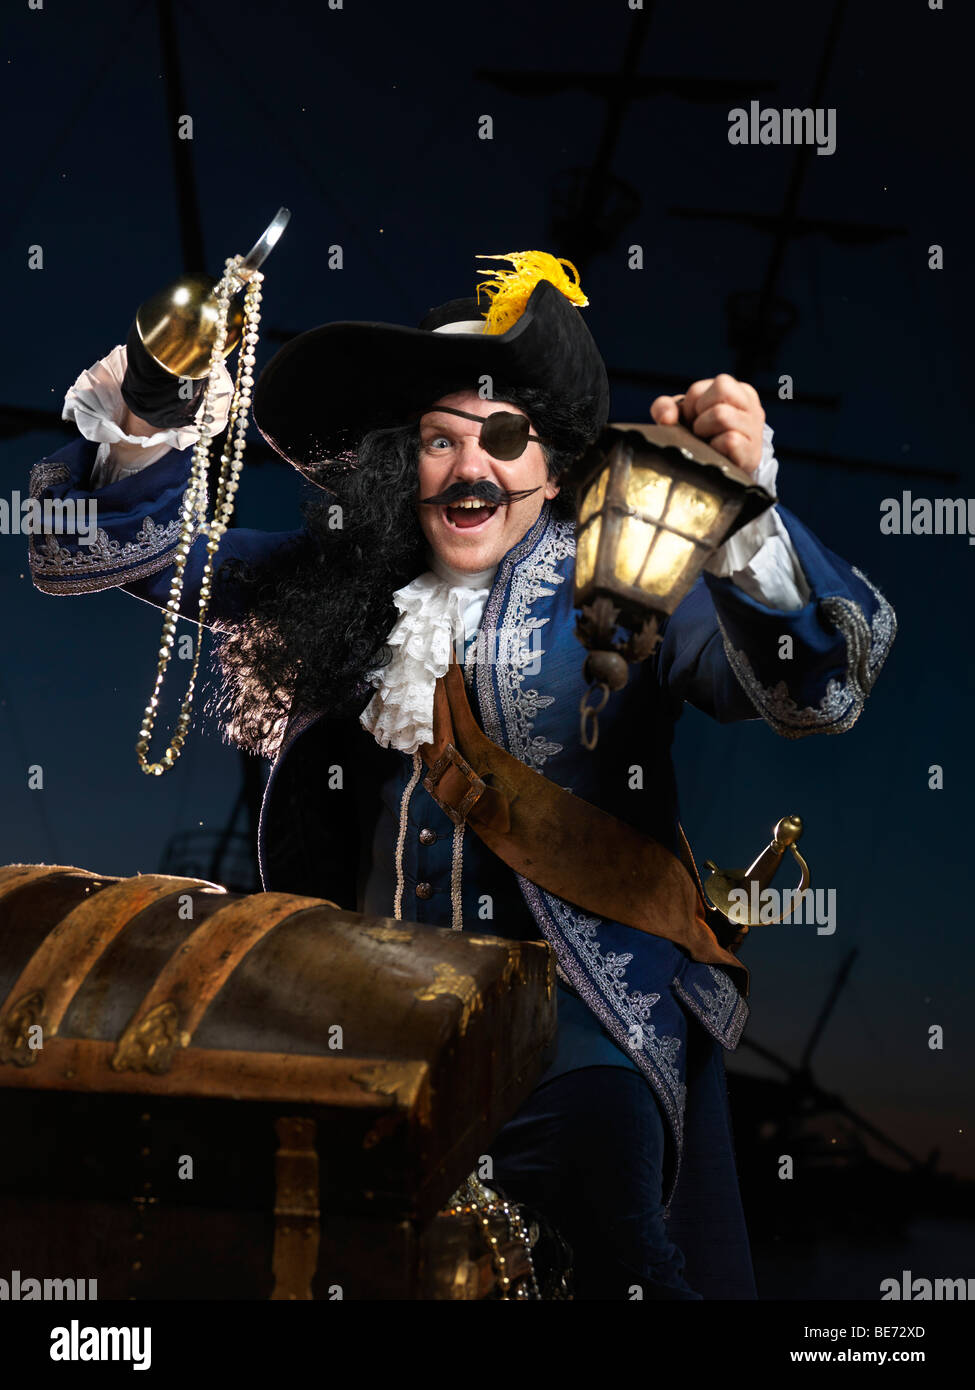 License available at MaximImages.com - Pirate with a lantern opening a treasure chest Stock Photo